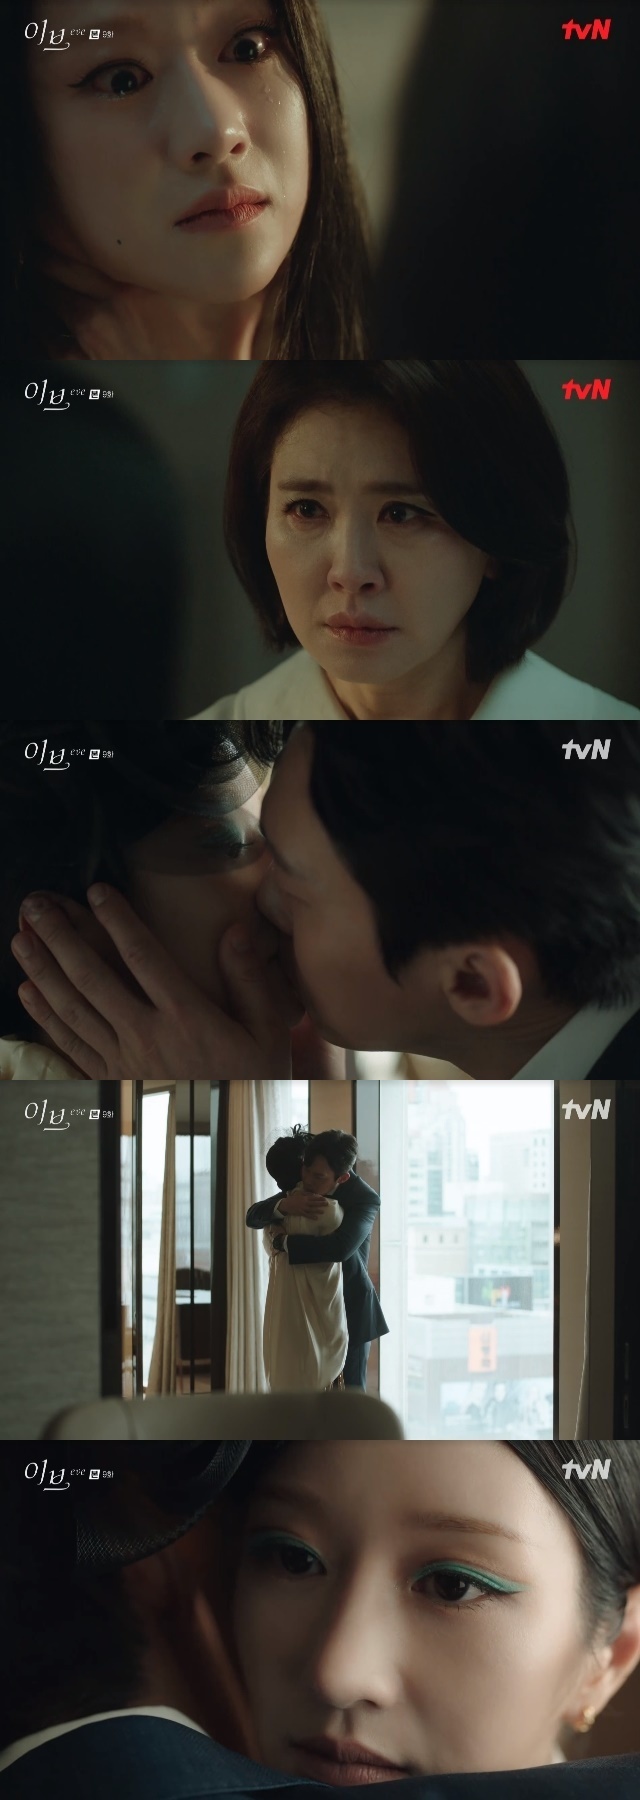 Seo Ye-ji began to blacken and run a lot more in the mind of Byeong-eun Park and the betrayal of fellow Lee Il-hwa, who were suspected of simply relieving desires.In the 9th episode of the TVN tree drama Eve (playplayed by Yoon Young-mi and directed by Park Bong-seop), which was broadcast on June 29, the situation did not flow as planned by Lee Sean Gelael (Seo Ye-ji) after the release of the affair with Kang Yoon-gyeom (Byeong-eun Park), and the rEvege was slowed for a while.Earlier, Lee had planned to shake up her mentality, which emphasizes external image while revealing her affair with Sora (Yoo Sun), and worsening her marital relationship, but it did not go as she wanted.Han Sora attended the Kindergarten Parents Meeting and showed off his position by slapping Lee Seel in front of everyone, and called out Lee Seel to the parents side of the Sean Gelael and told him that he had recovered his relationship with Kang Yoon-gum.He just solved his need for a while, and thats going to break our relationship, said Sora. I do not think you got me.I Eve decided to take part in management as a board member, and my husband admitted to the mistake, decided to build up my pride, and decided to overcome the children wisely.This is the world of adults, he laughed at Lee.In fact, Kang Yoon-gum, who entered the place where the two people were, shocked Lee Sean Gelael with a friendly attitude to Han Sora without pretending to know any of this.In addition, Lee Seel also learned that Jang Moon-hee (Lee Il-hwa) betrayed him.As a victim of LY, a person who follows Jang Moon-hee delivered a document containing the identity of Sean Gelael to Kang Yoon-kyum according to her order.Fortunately, Seo Eun-pyeong (Lee Sang-yeob) turned around before Kang Yoon-gyeom checked the contents of the documents, but Lee Sean Gelael, who learned about Jang Moon-hees betrayal, was heartbroken.This Sean Gelael Evetually blackened; this Sean Gelael later faced Jang Mun-hee and said, It is true that I fell for the river president: a man and a woman, a world I didnt know.I was afraid that I was paralyzed regardless of my will. I admit that there is no alternative but body. However, Lee Sean Gelael shows his will to continue his rEvege and says, (Kang Yoon-kyum) can erode here (head); Kang Yoon-kyum has already given his heart.They can make him brutal. They can make him suspect and kill him. I will cut off the breath of those who have put me in hell. Lee Sean Gelael promised to do well with a tearful look in Lunacys eyes.After that, Lee Sean Gelael collected Sora, Eundam-ri (Son So-mang) and Yeo Yeo-hee (Kim Ye-eun) as a private institute.However, Eun-dam-ri, Ji-hee, confirmed the CCTV and found out that Soras daughter and their child had a fight in the scheme of Sean Gelael, and the rewarding Kindergarten was removed.The performance team was disbanded and the deputy head of the parent conference was notified.Still, with a relaxed smile, Lee made a meaningful statement: The exit is not me, but Mr. Sora.He also showed a smile full of Lunacy to Sora, who accused him of casual Iko.Lee Sean Gelael made a promise to make Kang Yoon-gyeom call him as soon as Han Sora left.Then he called Sora and said, Sora, youll never think why. Then Im Gascio. But psycho doesnt know what to do.I will set out your life and I will hurt you. You will stop me and I will break through. Which of us will win. Earlier, the Sean Gelael said, I was not happy to see you at Kindergarten. You understand? Well see you soon.There is a Hotel in a place with a lot of schedules.I am disappointed that Sora said, He just solved his desire for a while, he said, I do not think anyone is strange Eve if you go in and out.But now, without hesitation, Lee has Kang Yoon-gyeom and Hotel Secret Affair.